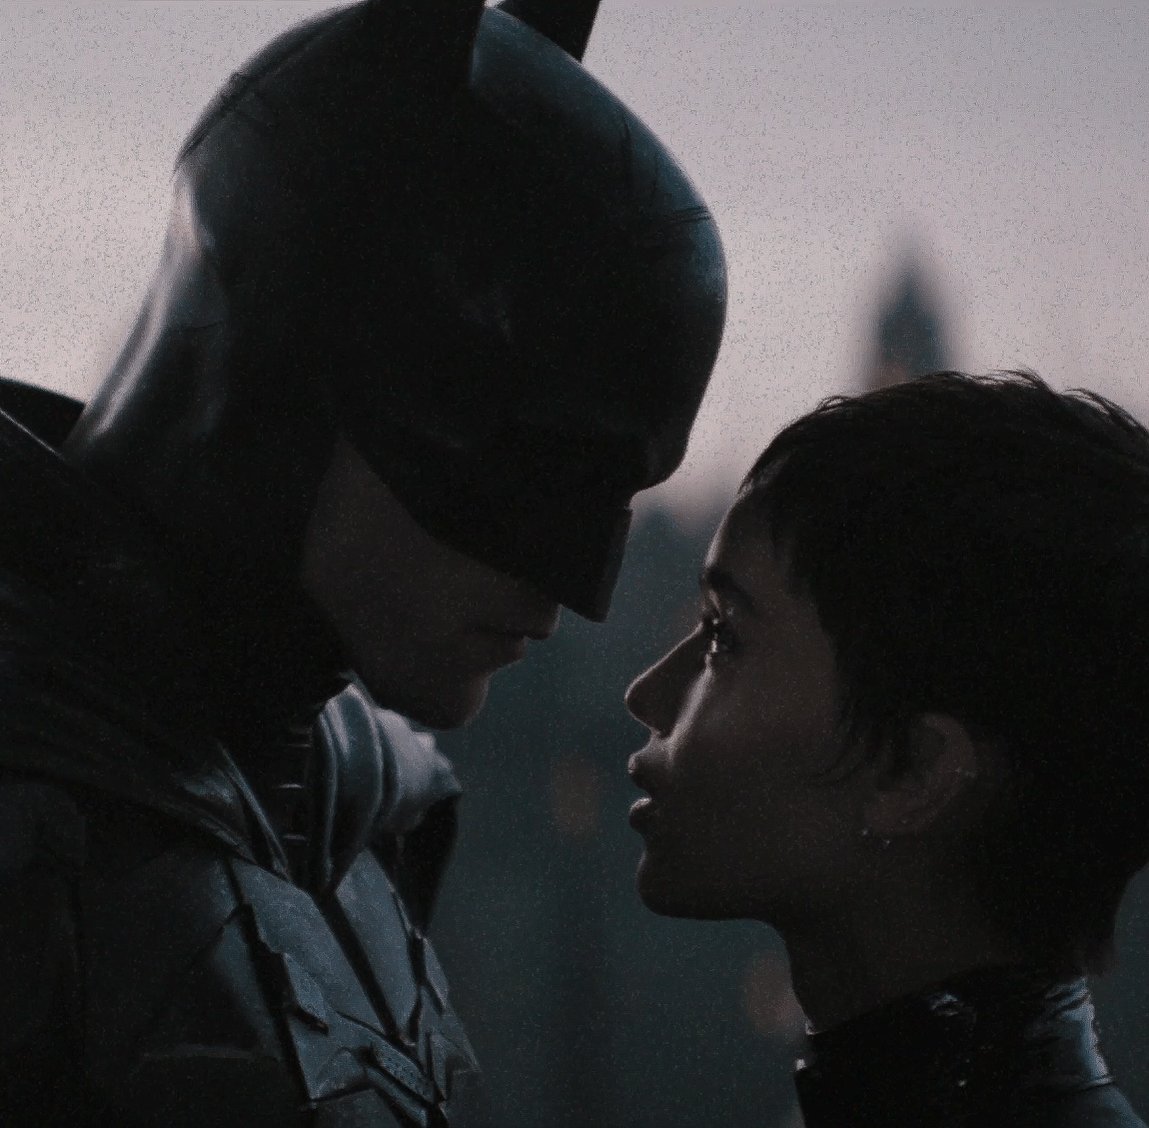 Batman and catwoman gifs